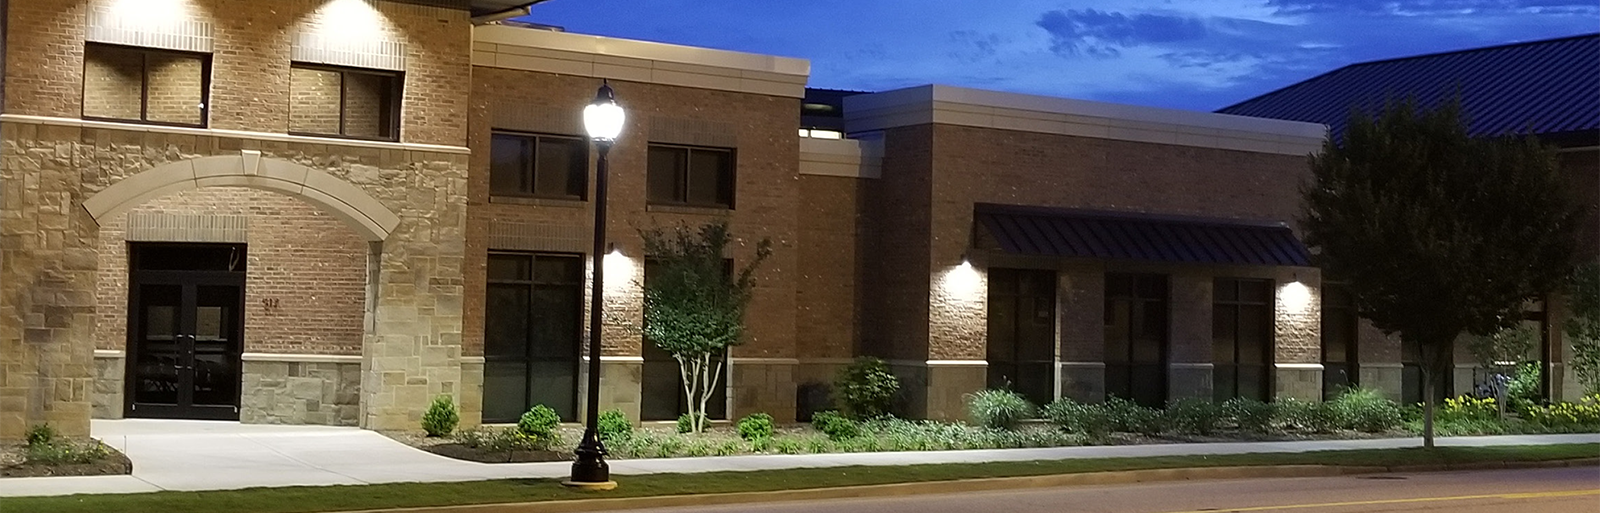 Exterior of commercial building lit with outdoor wall mount lighting 